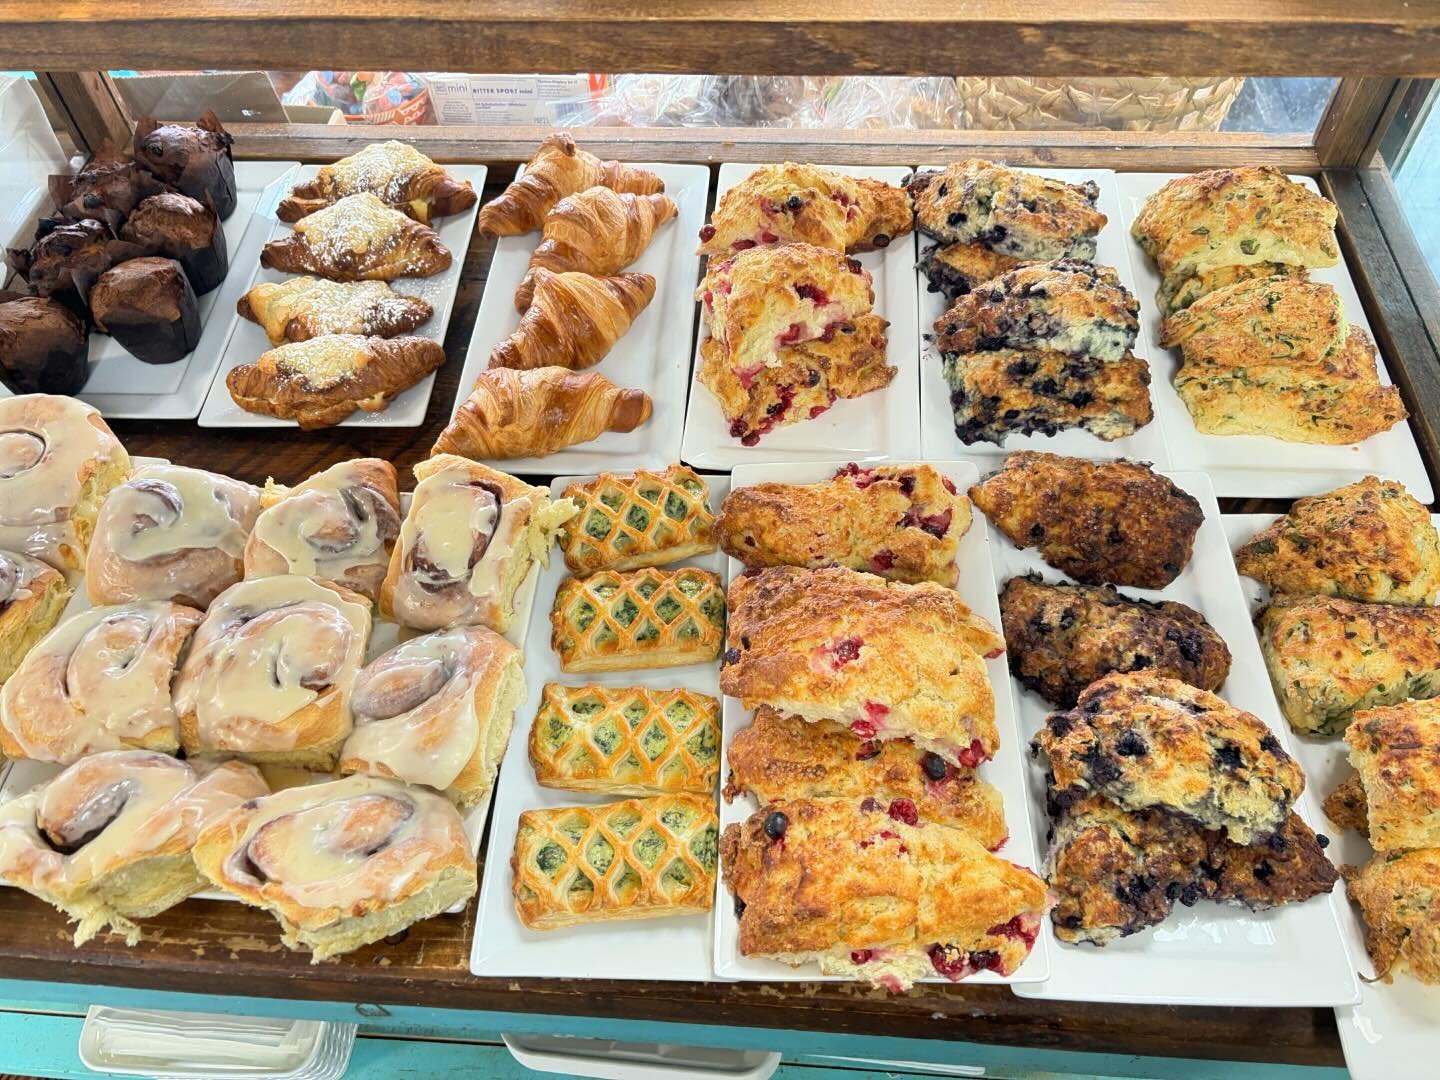 Talk about a morning spread!!! Lots of delicious goodies  up for grabs!!!! 🤭

#bakedfreshdaily #deliciousness #chesterns #scones #cinnamonrolls #croissant #pastries